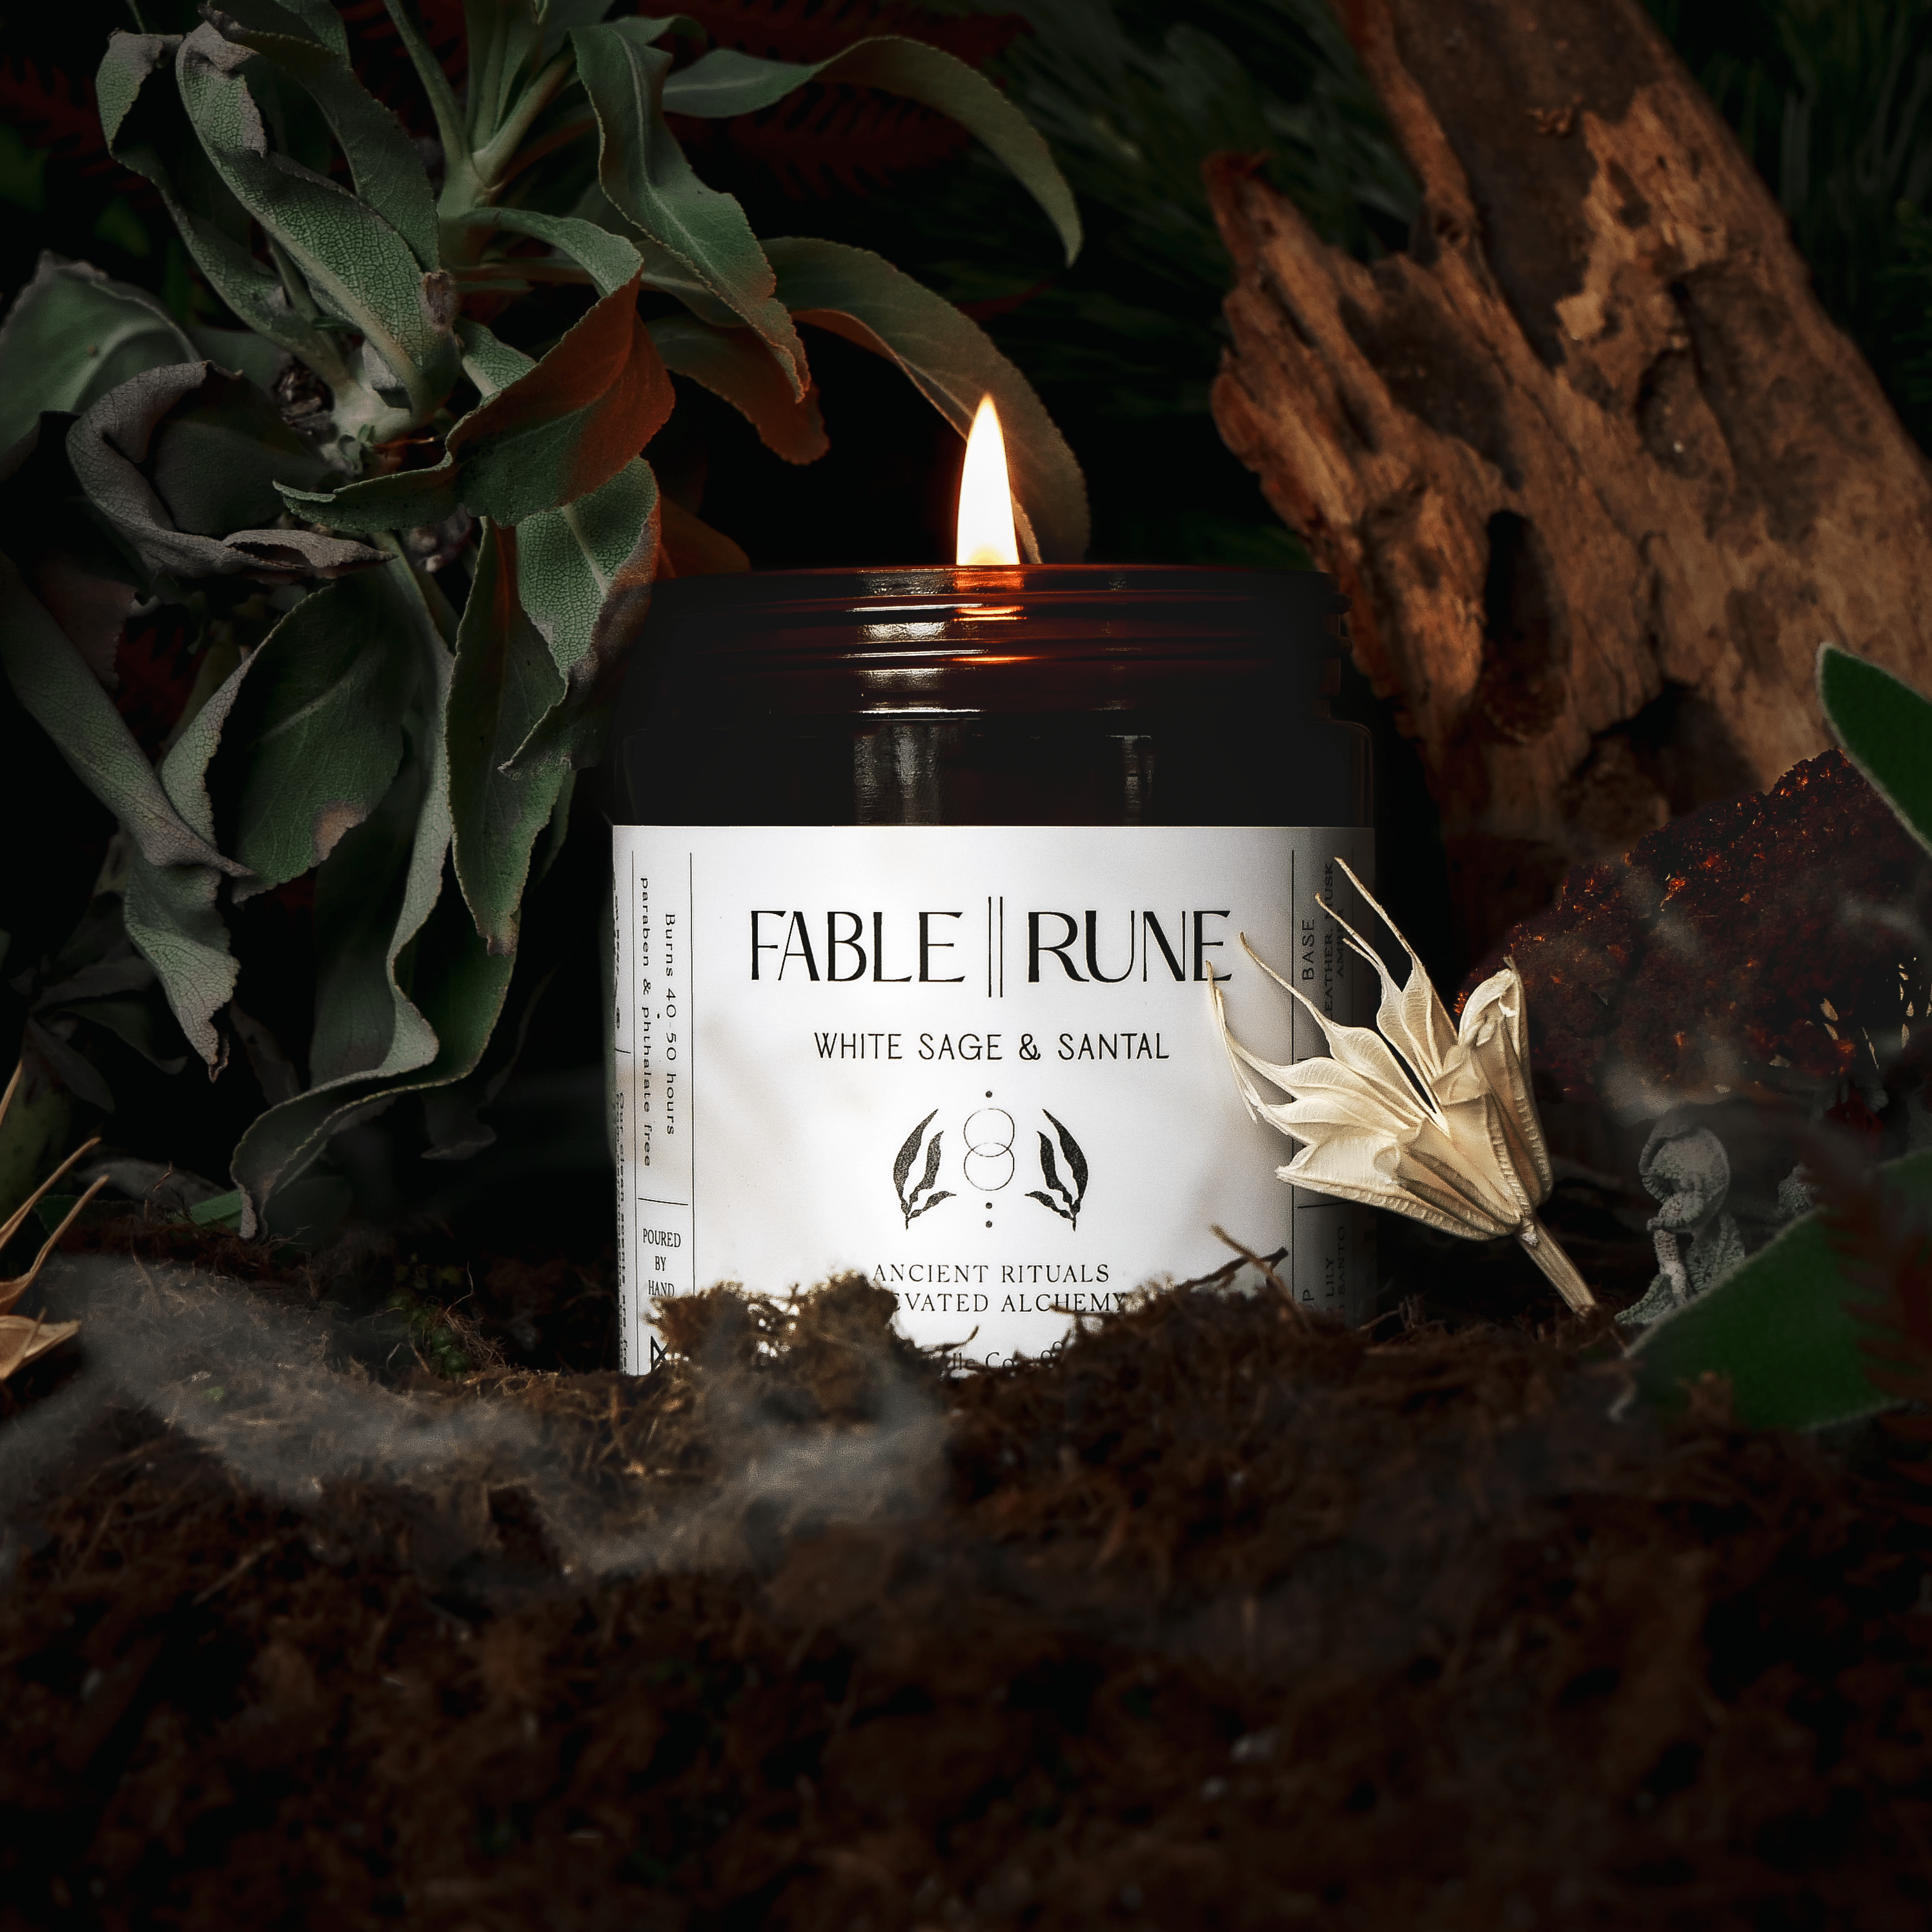 FABLERUNE Candle 8 oz WHITE SAGE & SANTAL SOY CANDLE